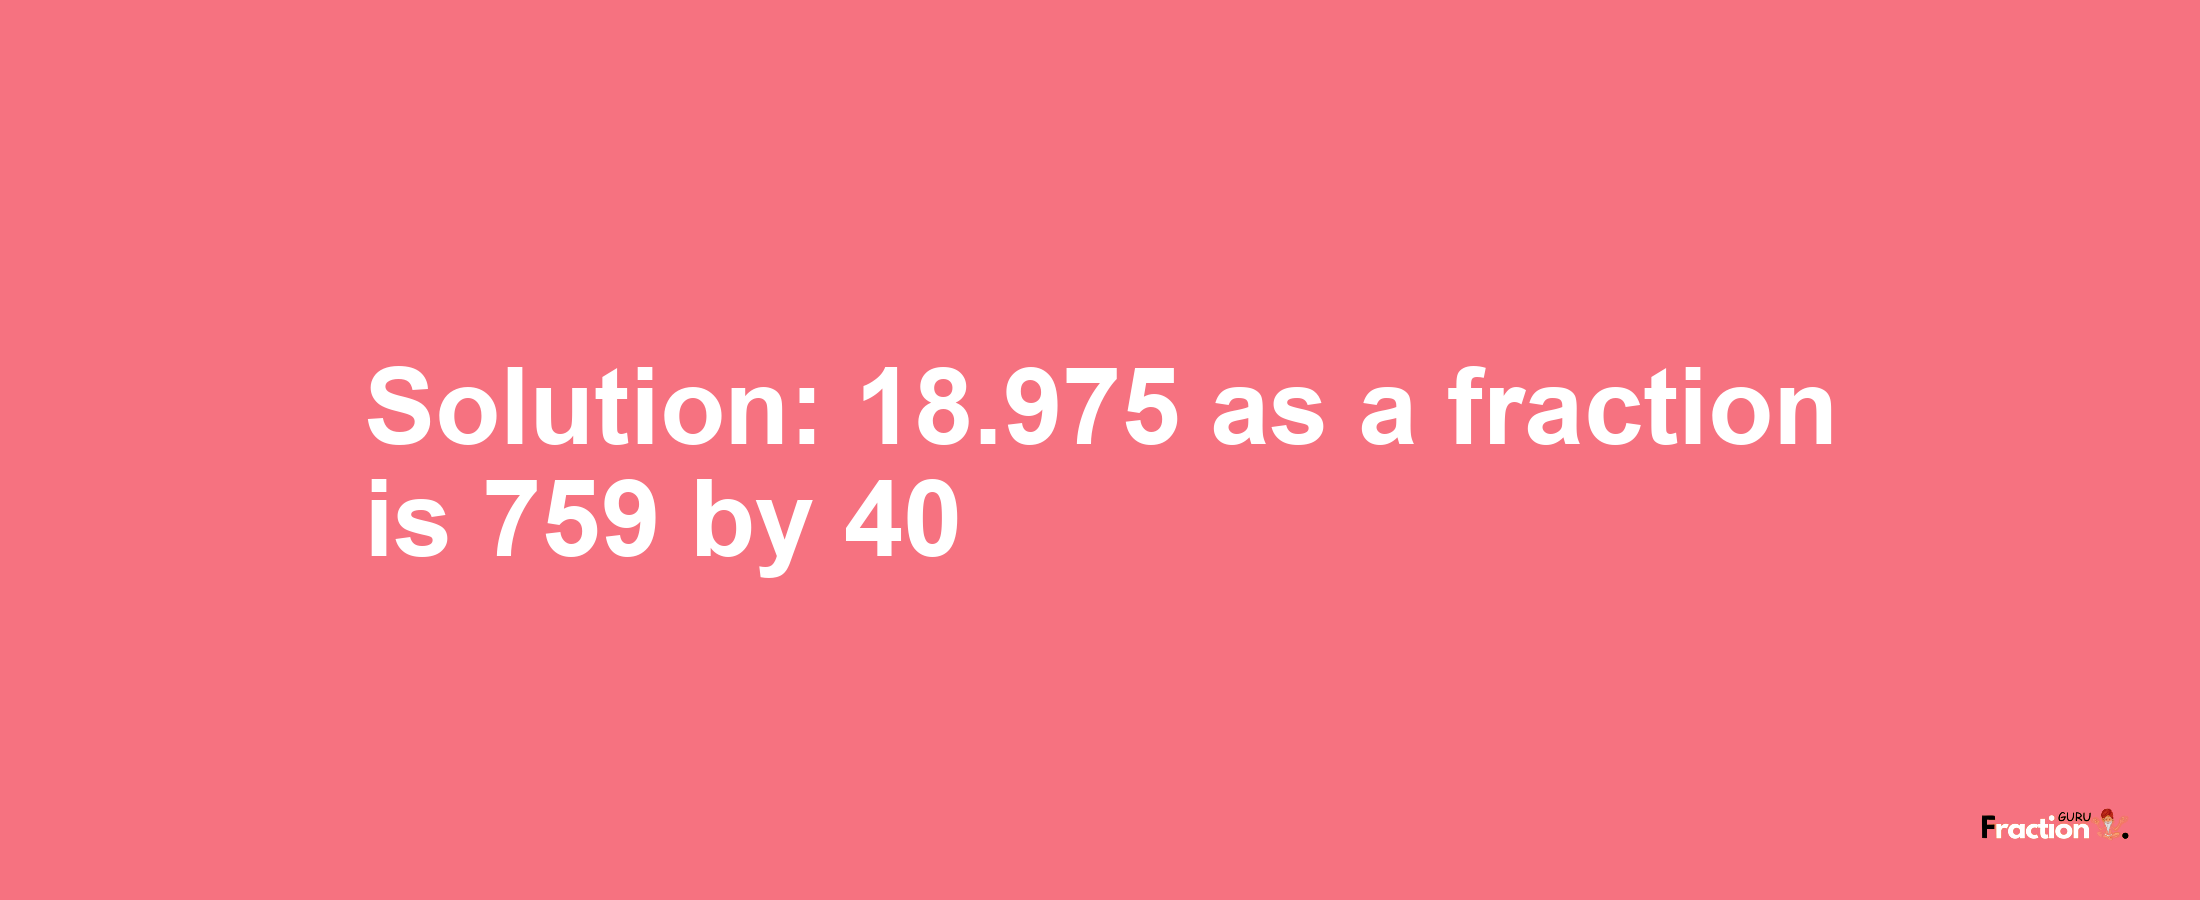 Solution:18.975 as a fraction is 759/40